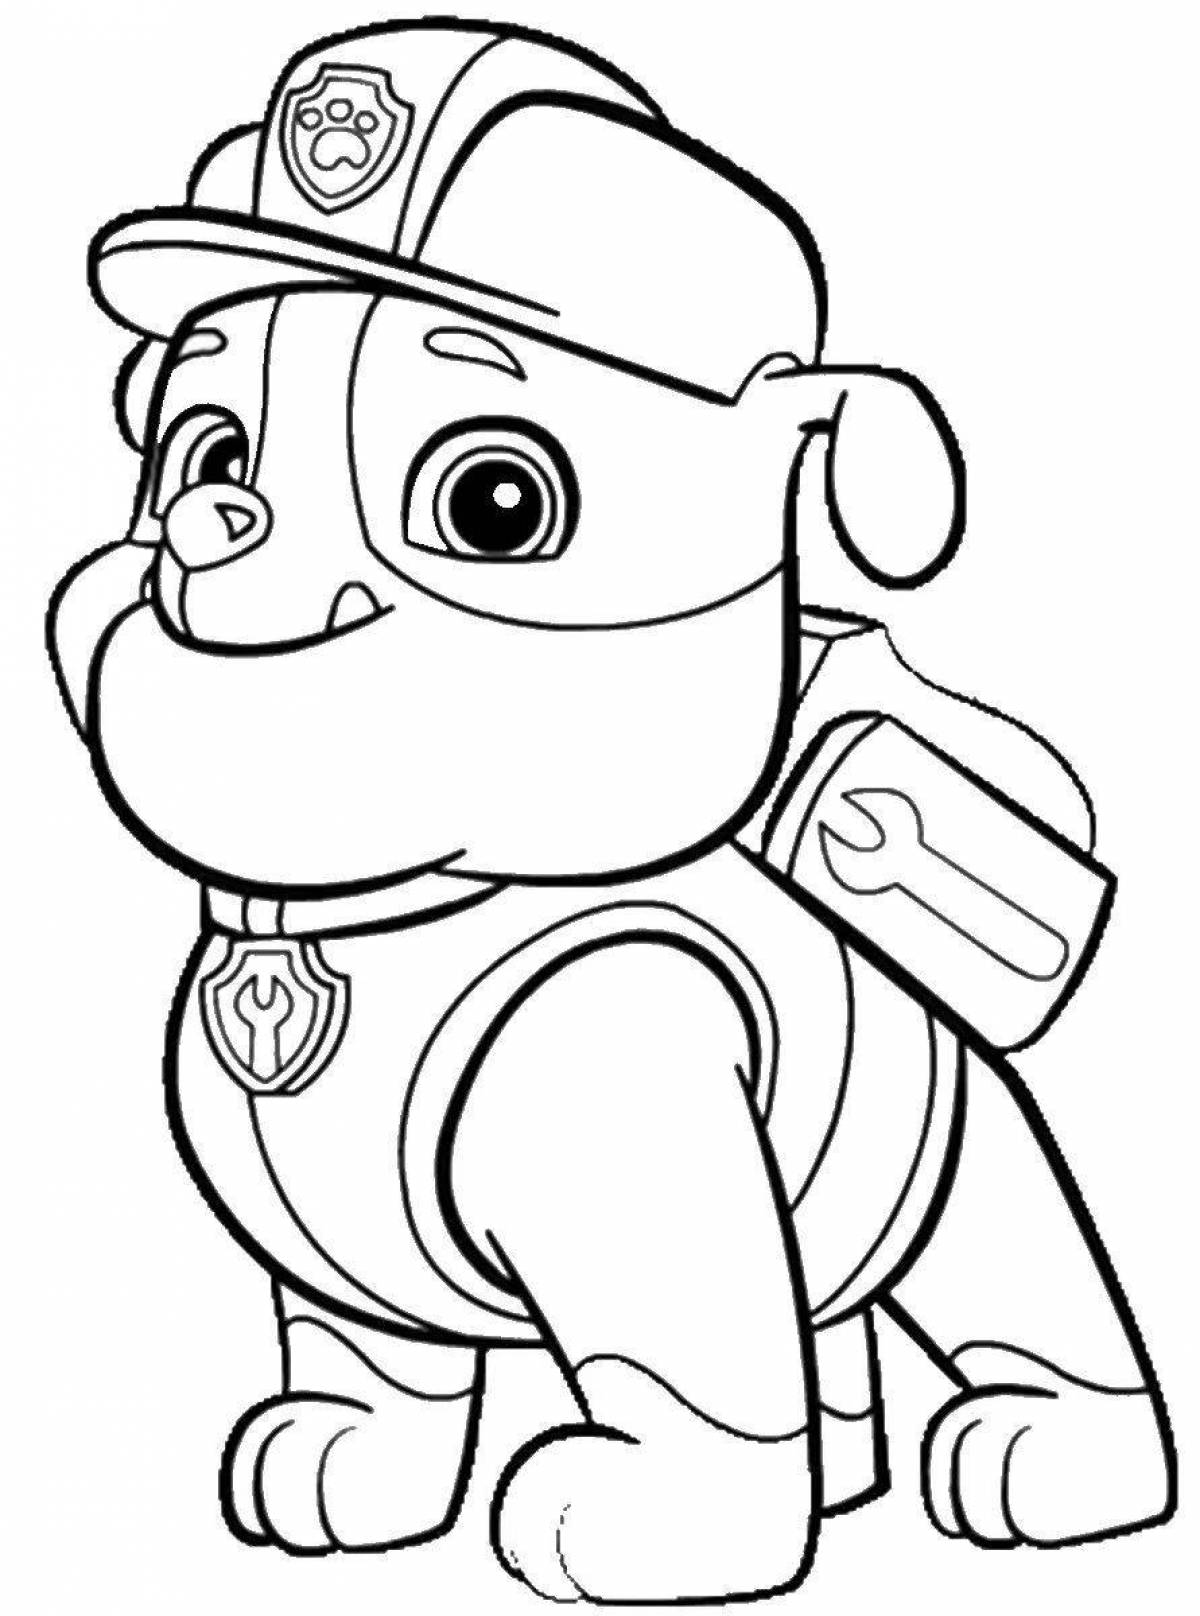 Paw Patrol bright coloring book for children 5-6 years old